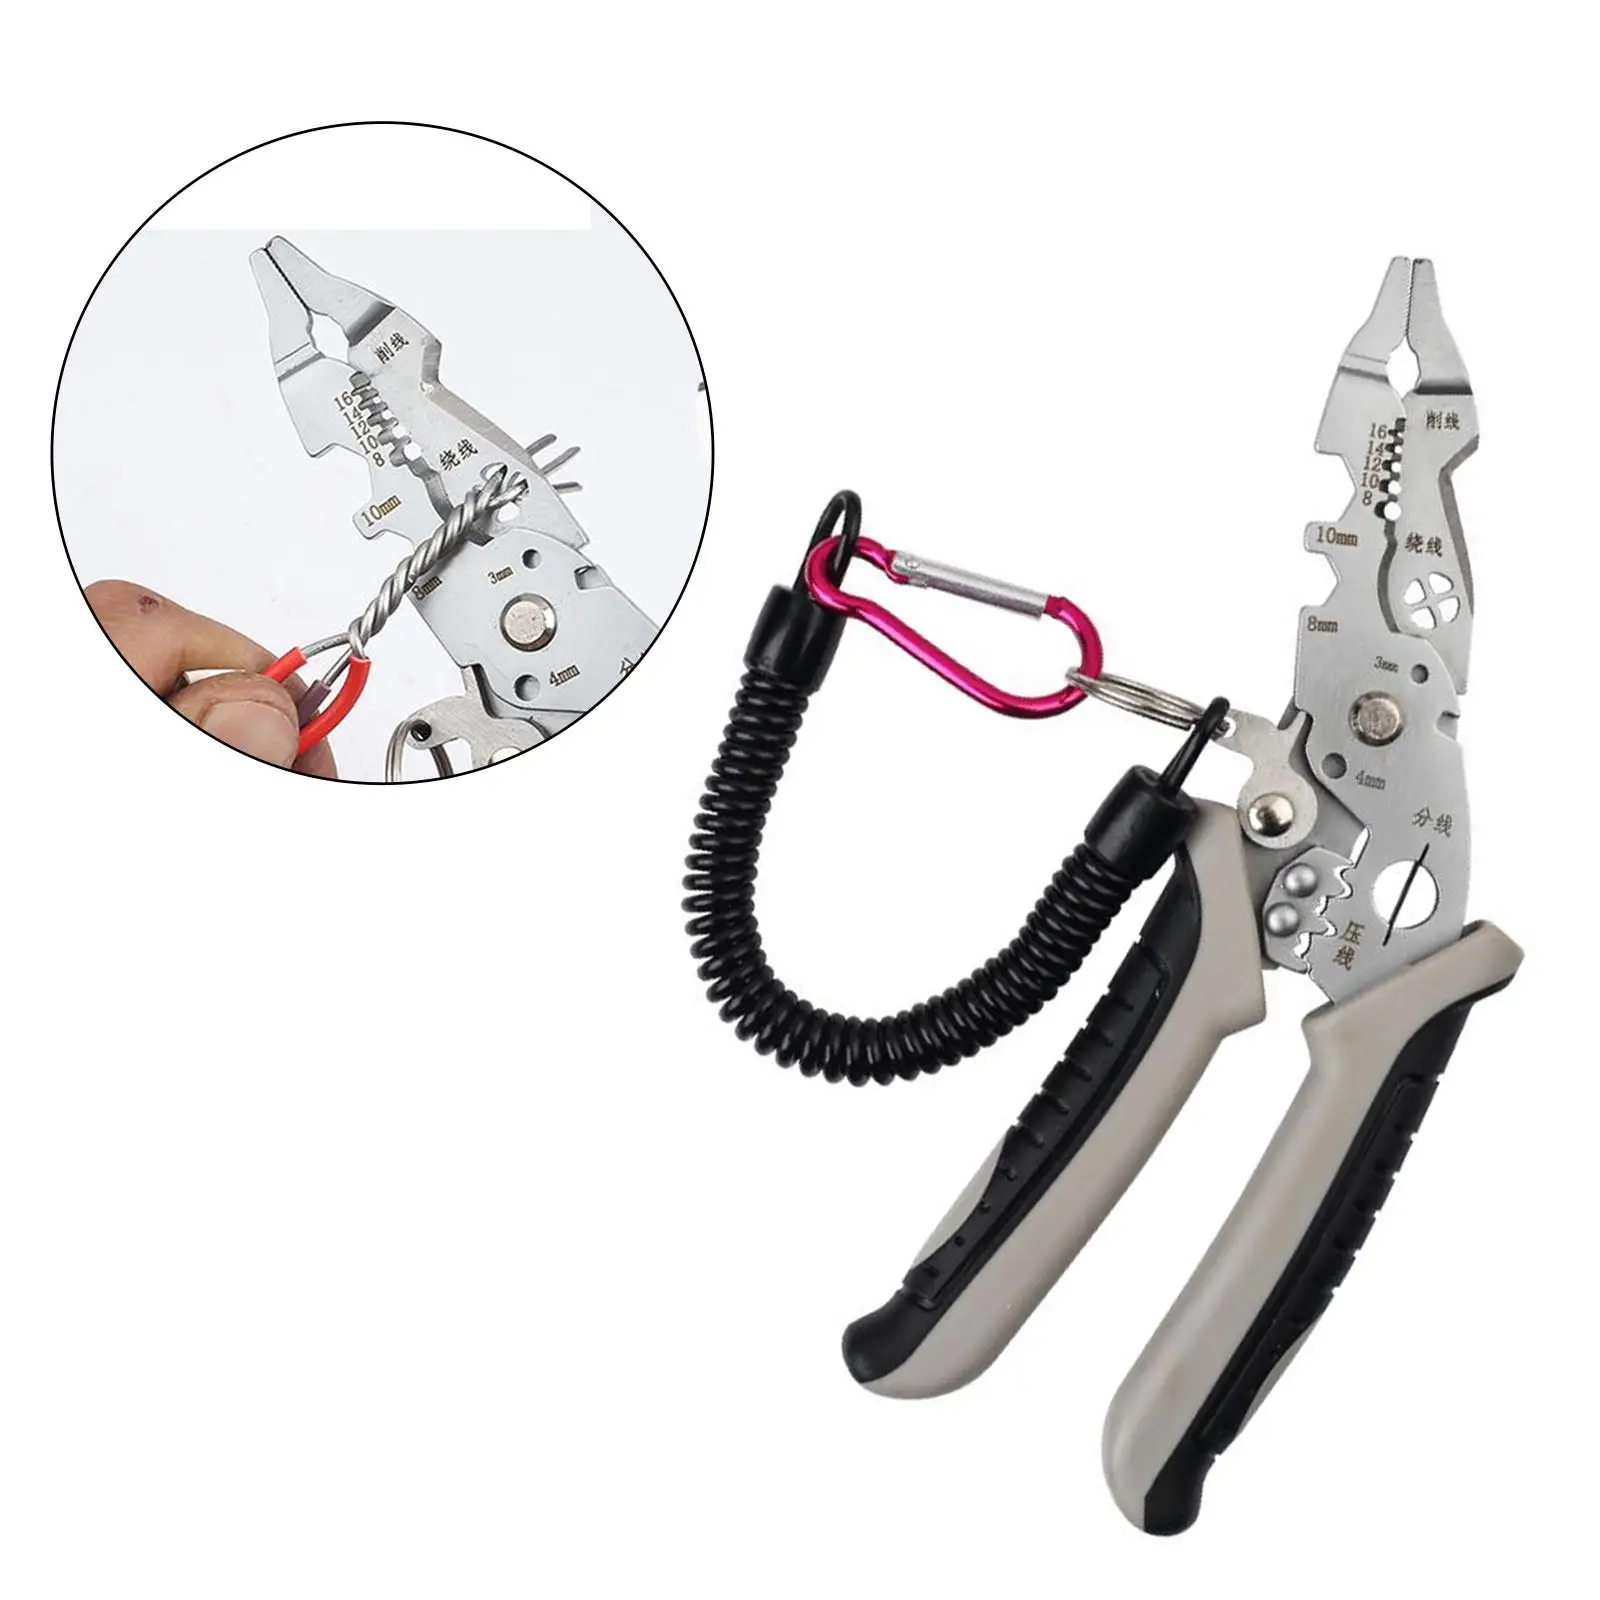 

Wire Tool Multipurpose Wire Pliers Tool for Pressing Wrench Cutting